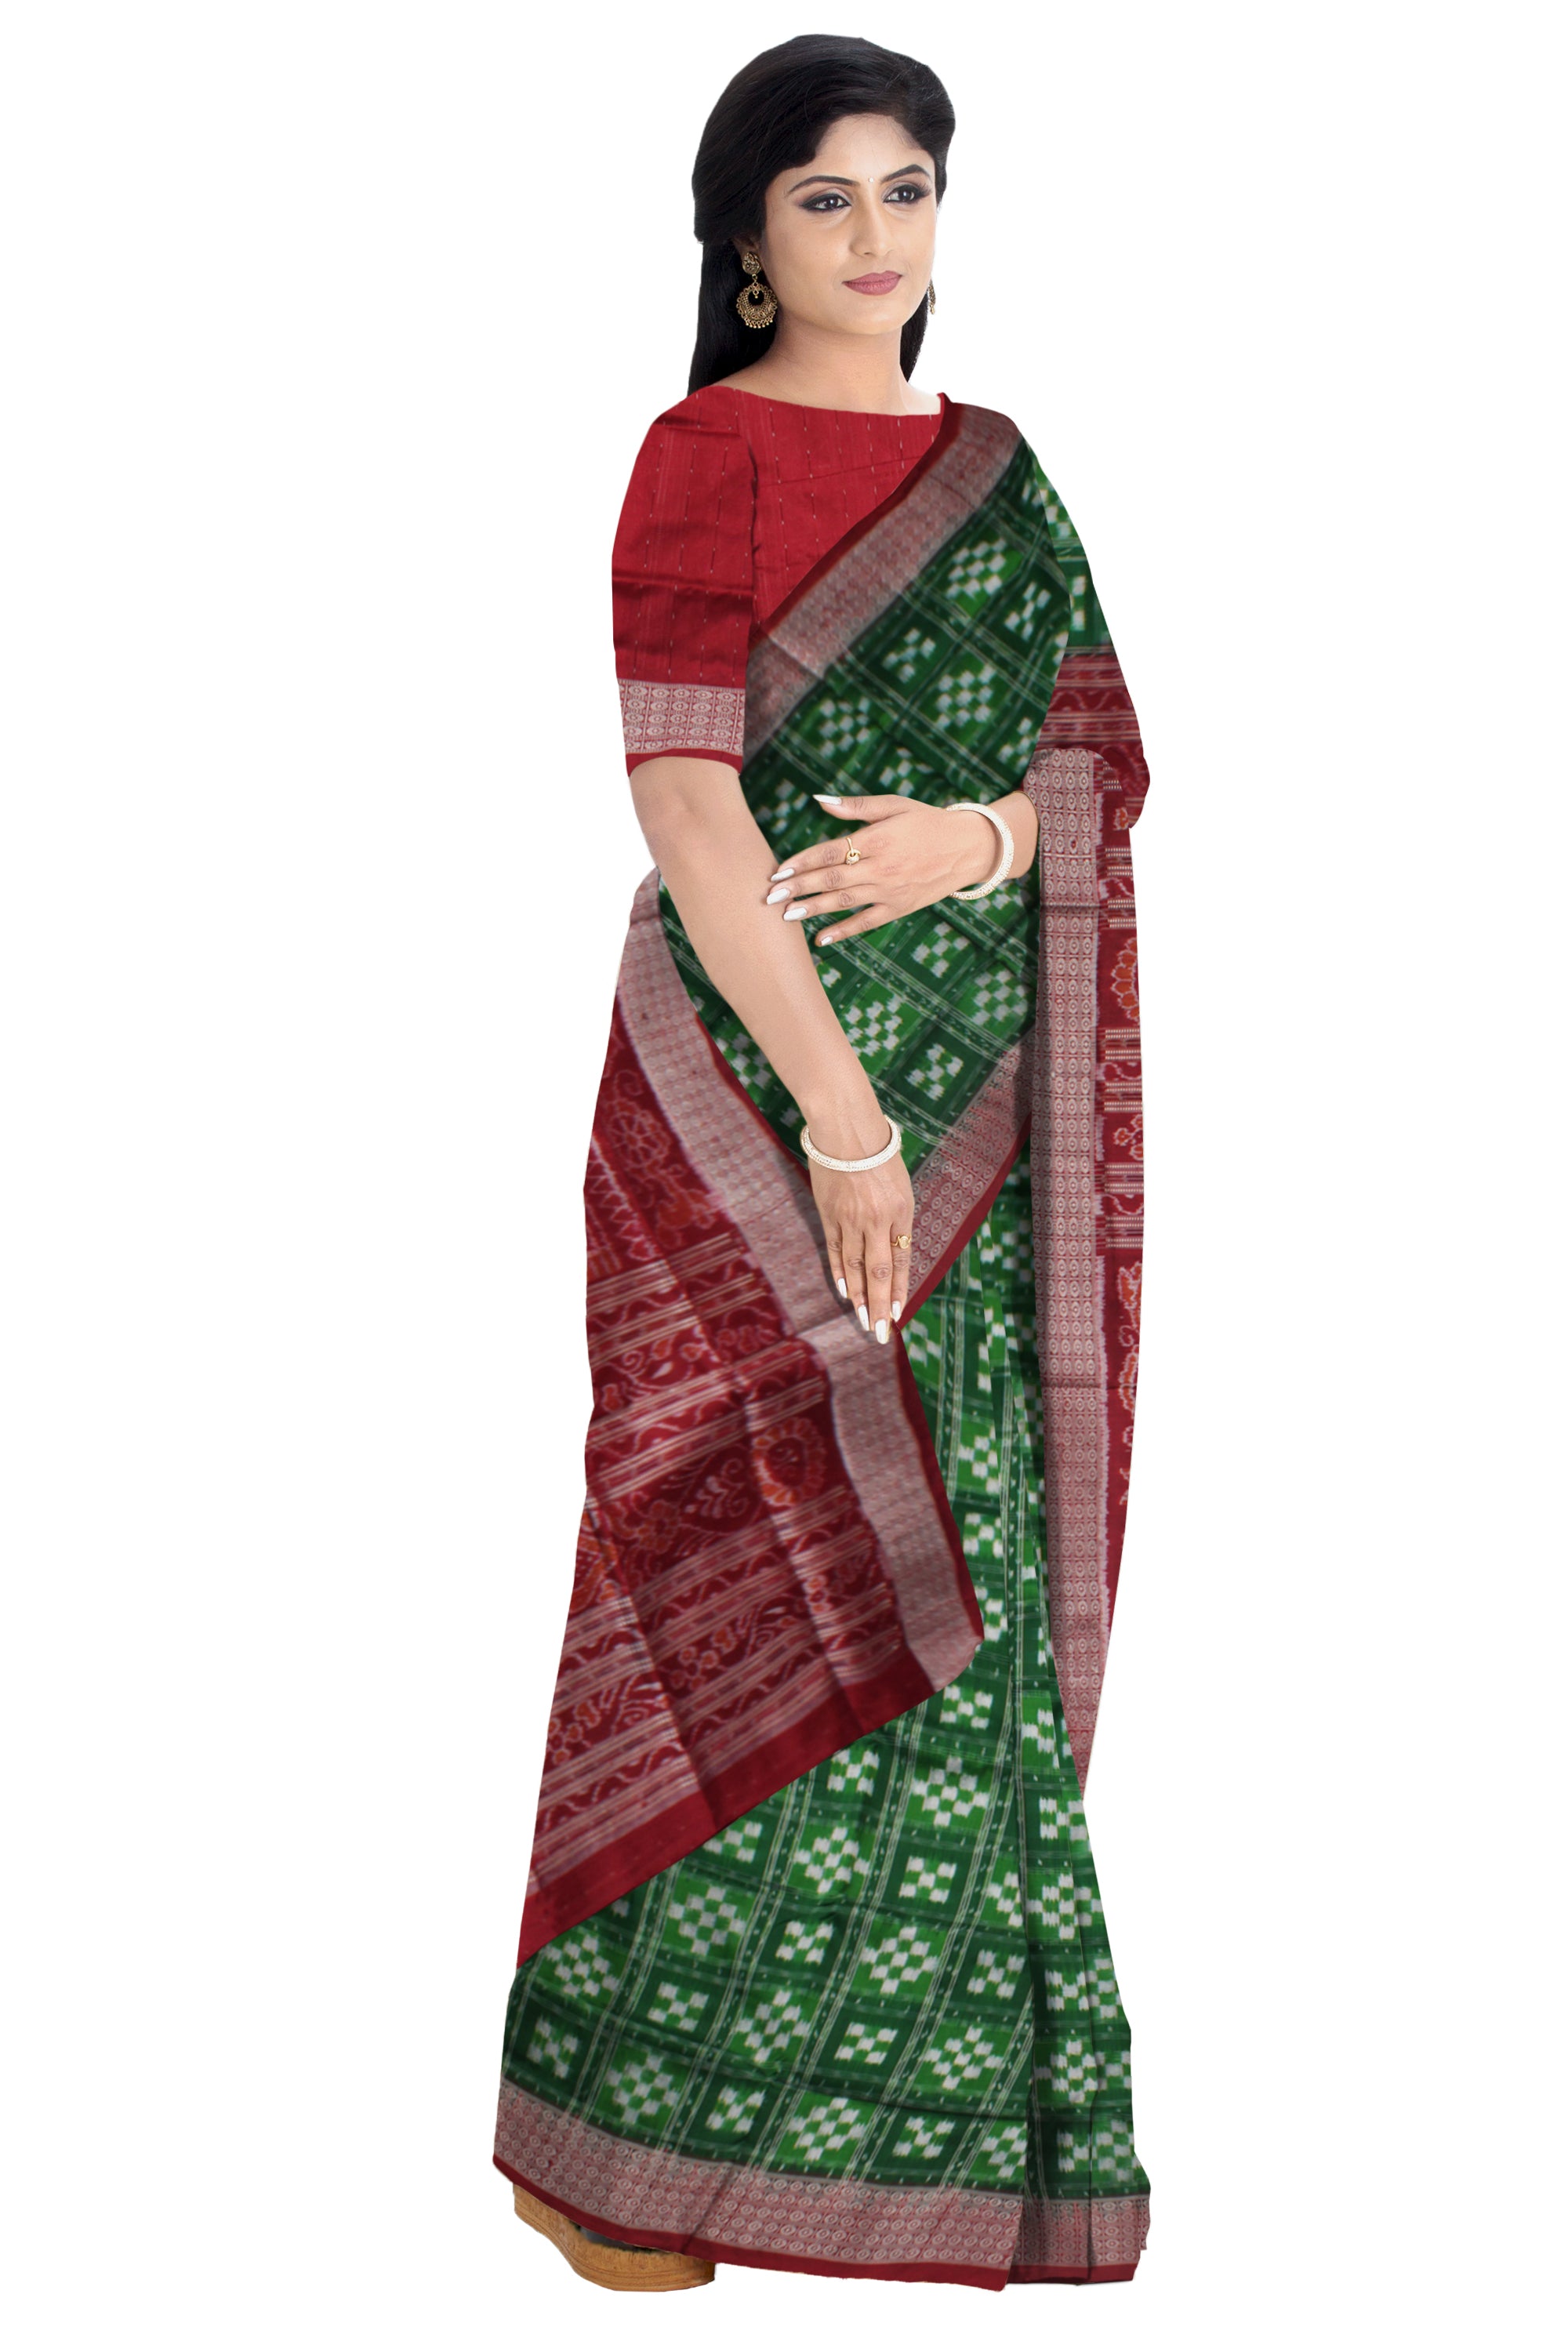 FULL BODY SMALL  PASAPALI PATTERN PURE SILK SAREE IS GREEN AND MAROON COLOR BASE,ATTACHED WITH MATCHING BLOUSE PIECE. - Koshali Arts & Crafts Enterprise